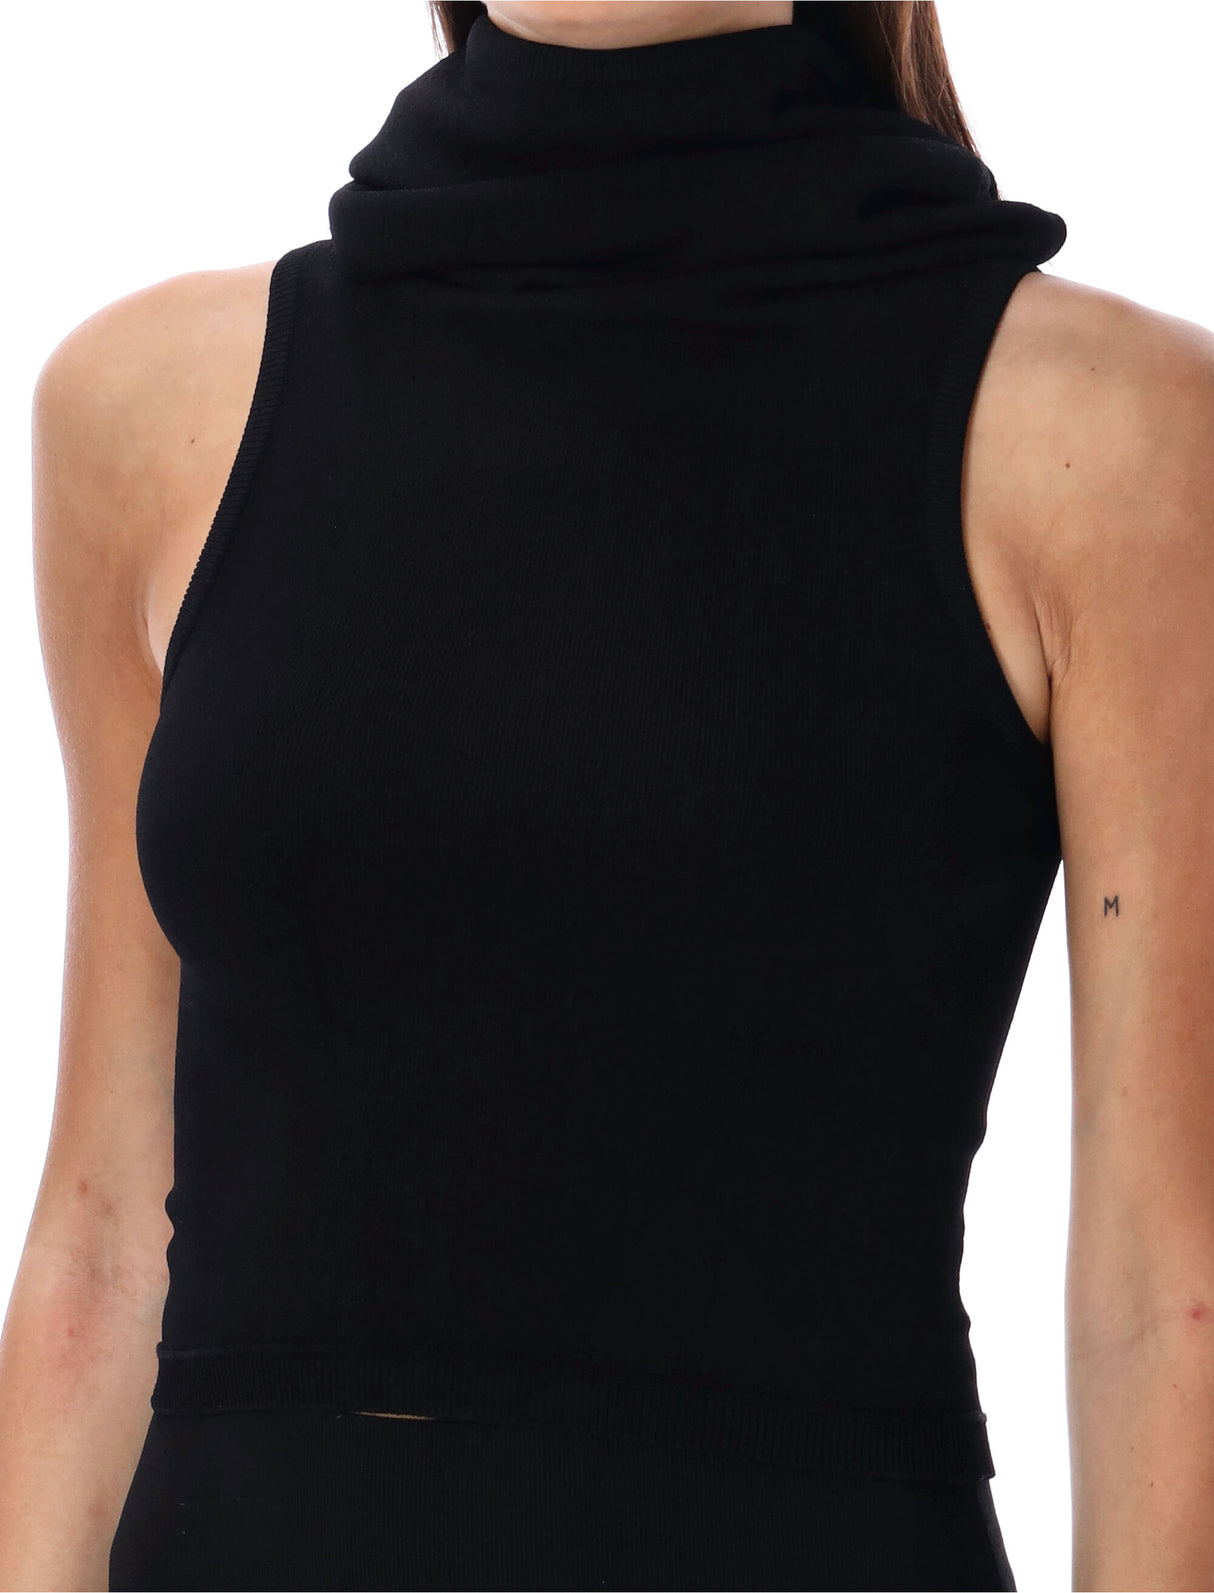 ALAIA Sleek and Edgy Black Hooded Crop Top for Women